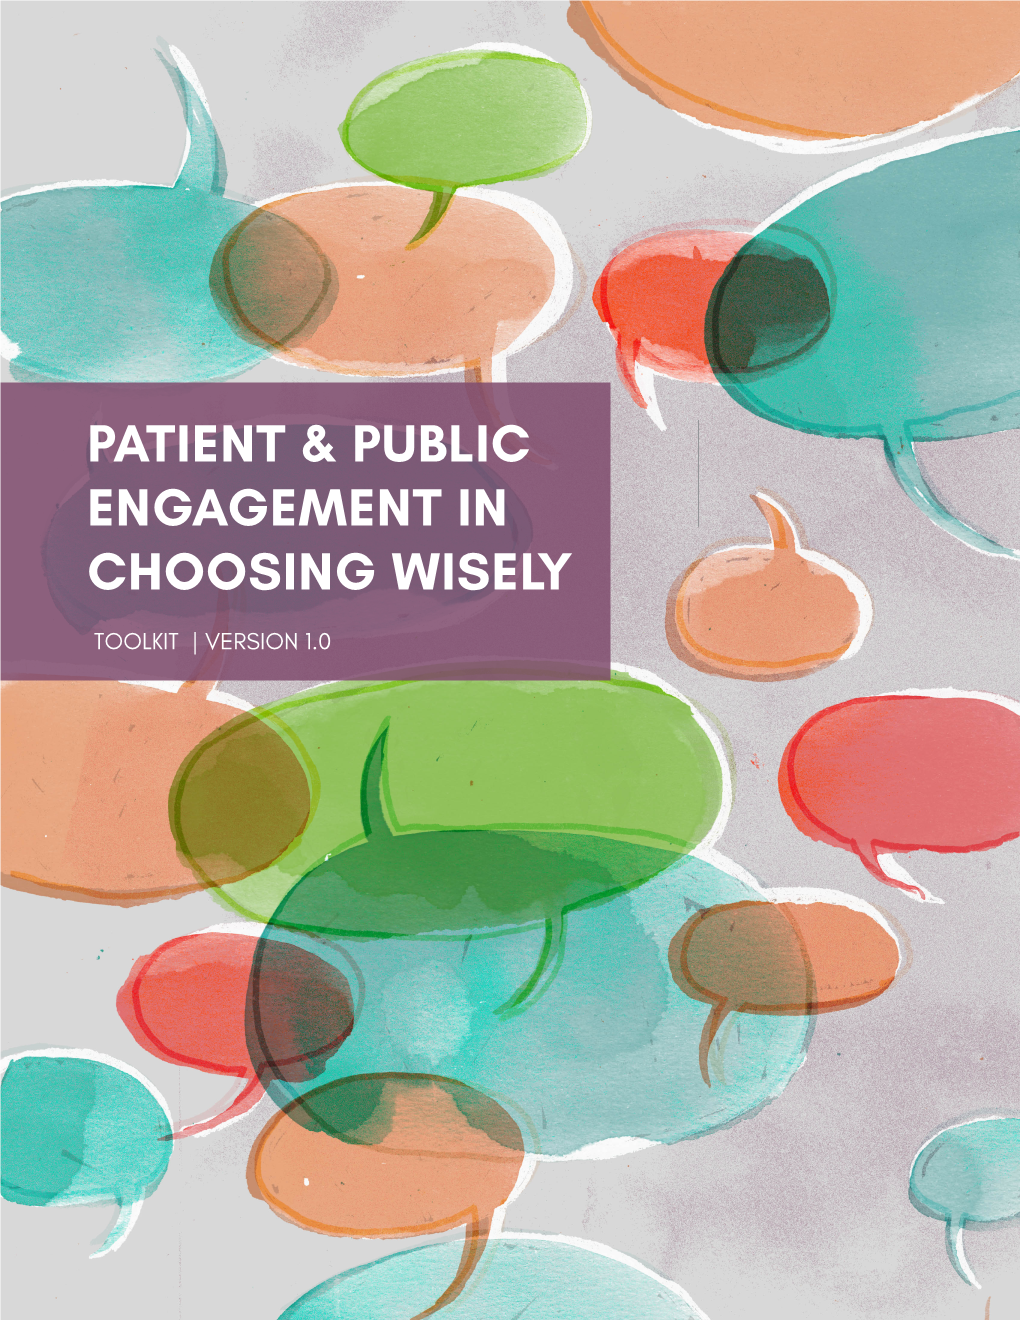 Patient & Public Engagement in Choosing Wisely